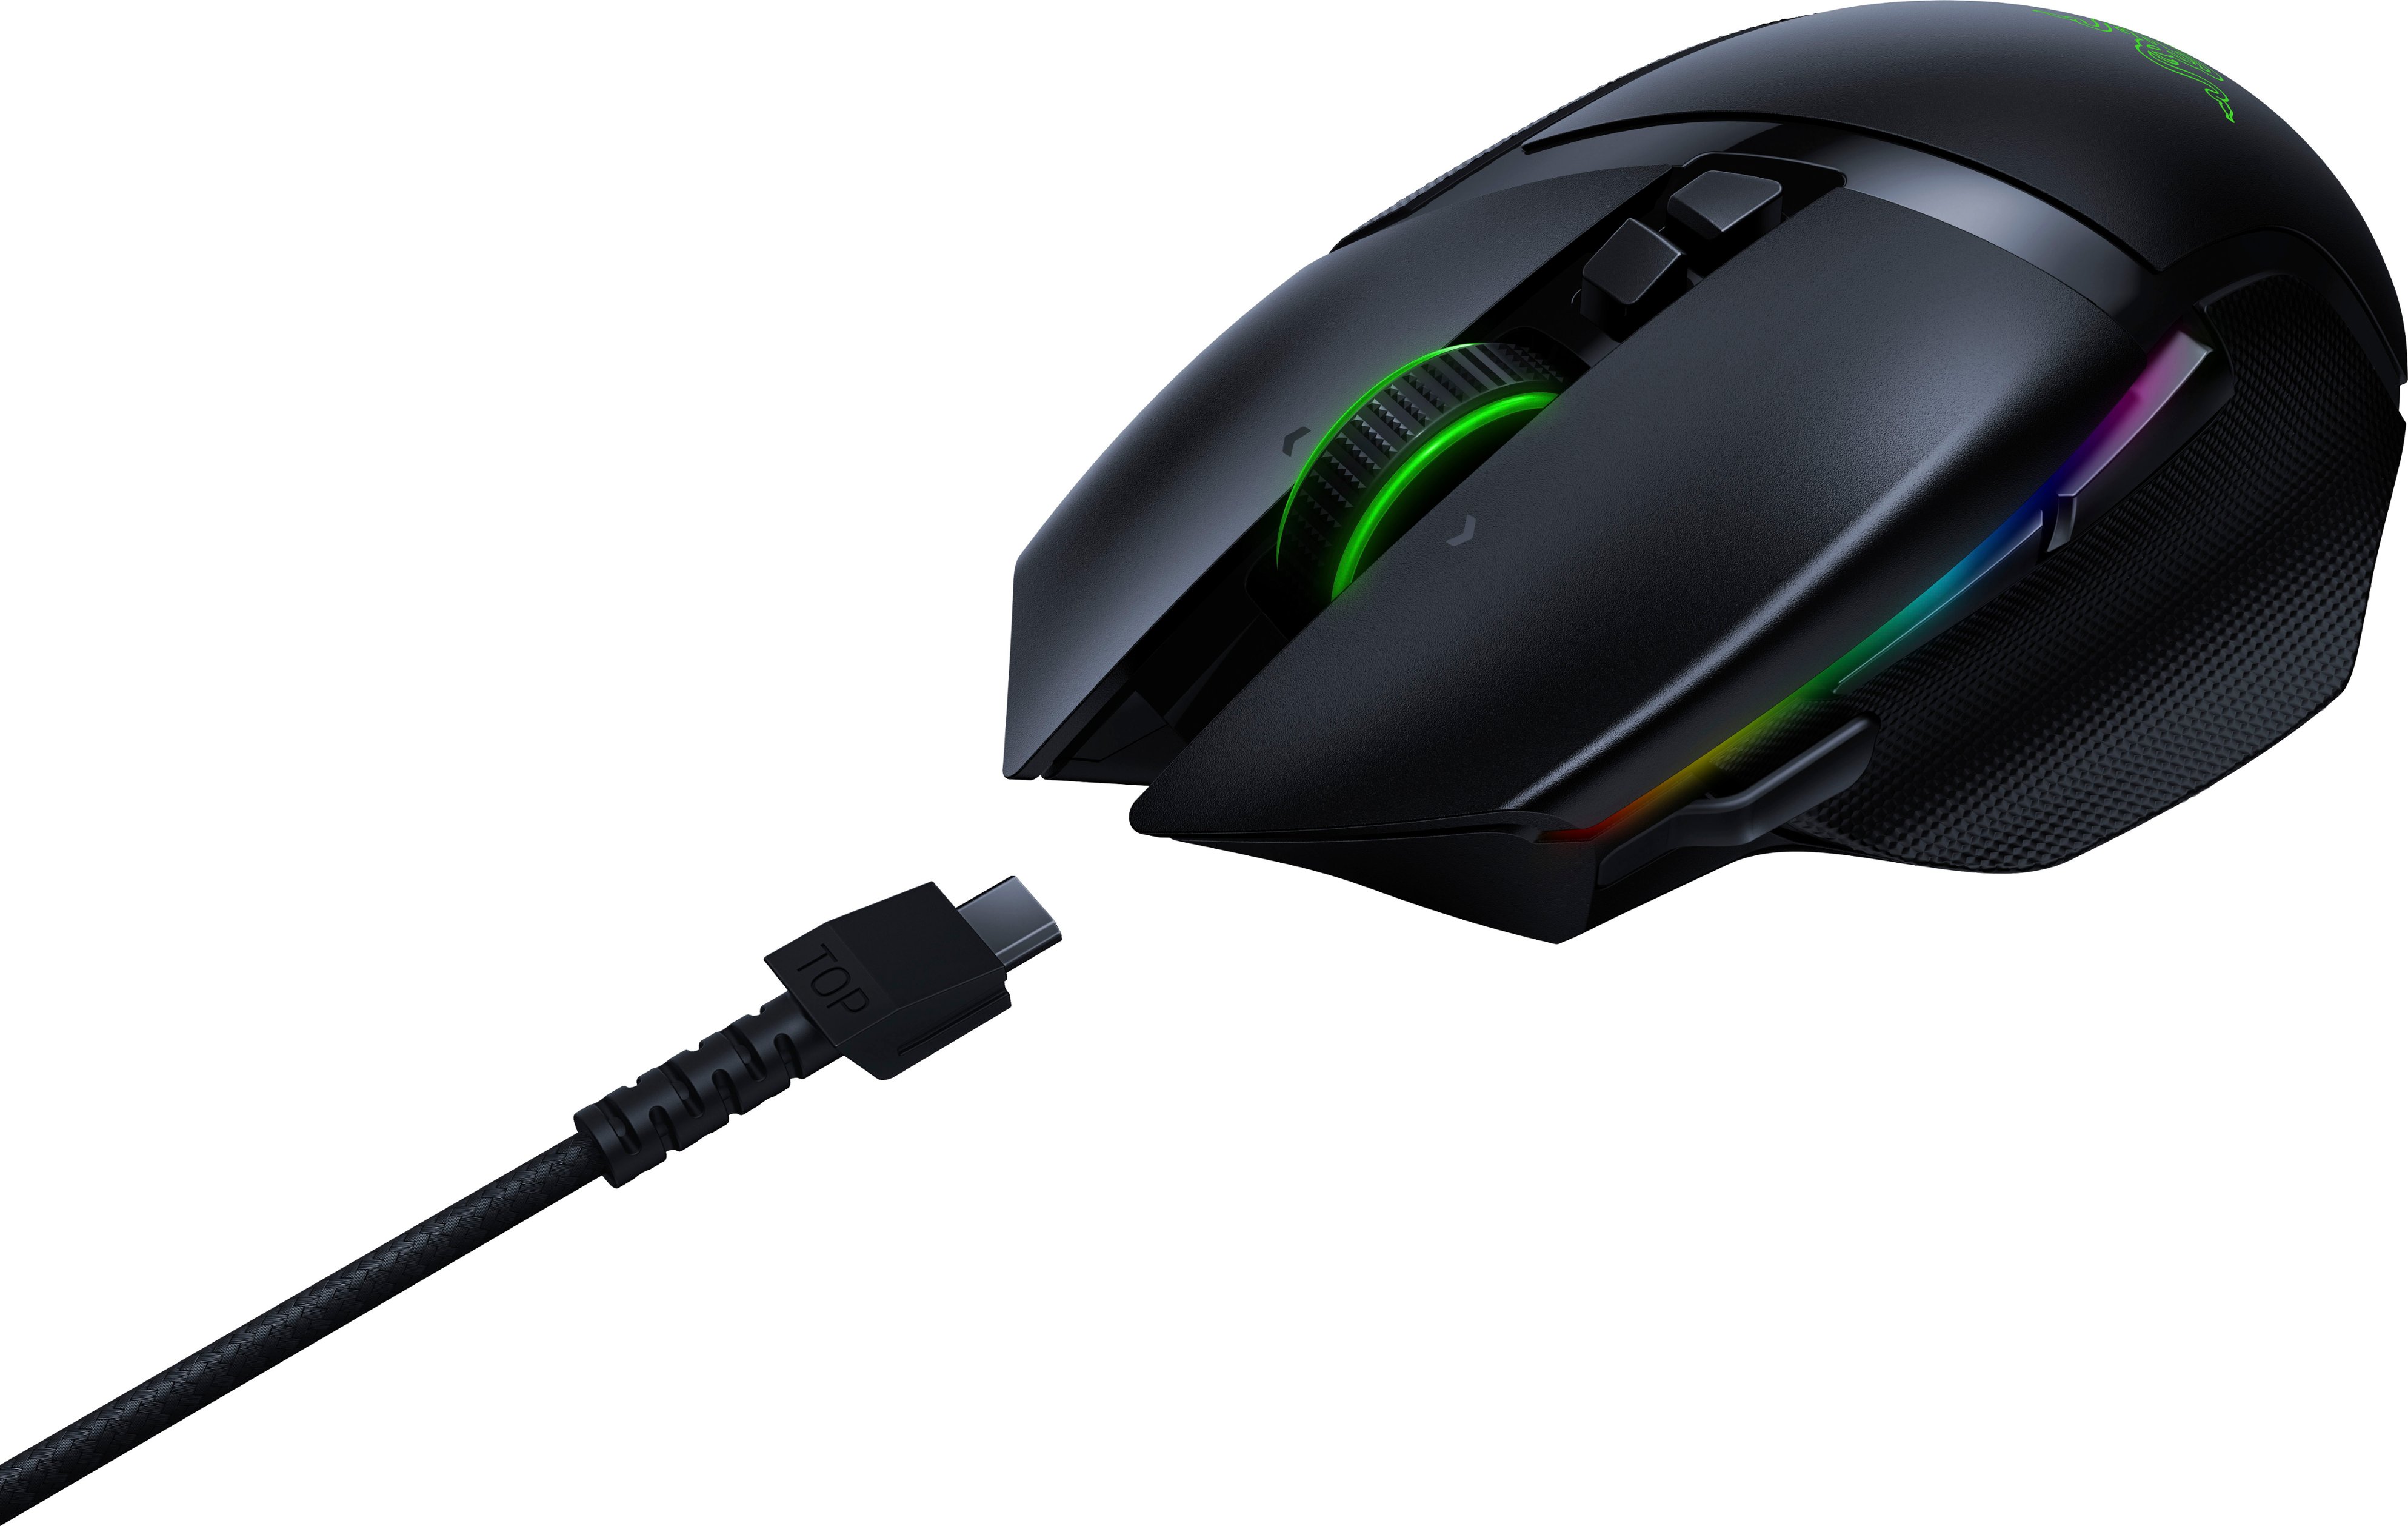 Razer Basilisk Ultimate Wireless Optical with HyperSpeed Technology and  Charging Dock Gaming Mouse Black RZ01-03170100-R3U1 - Best Buy